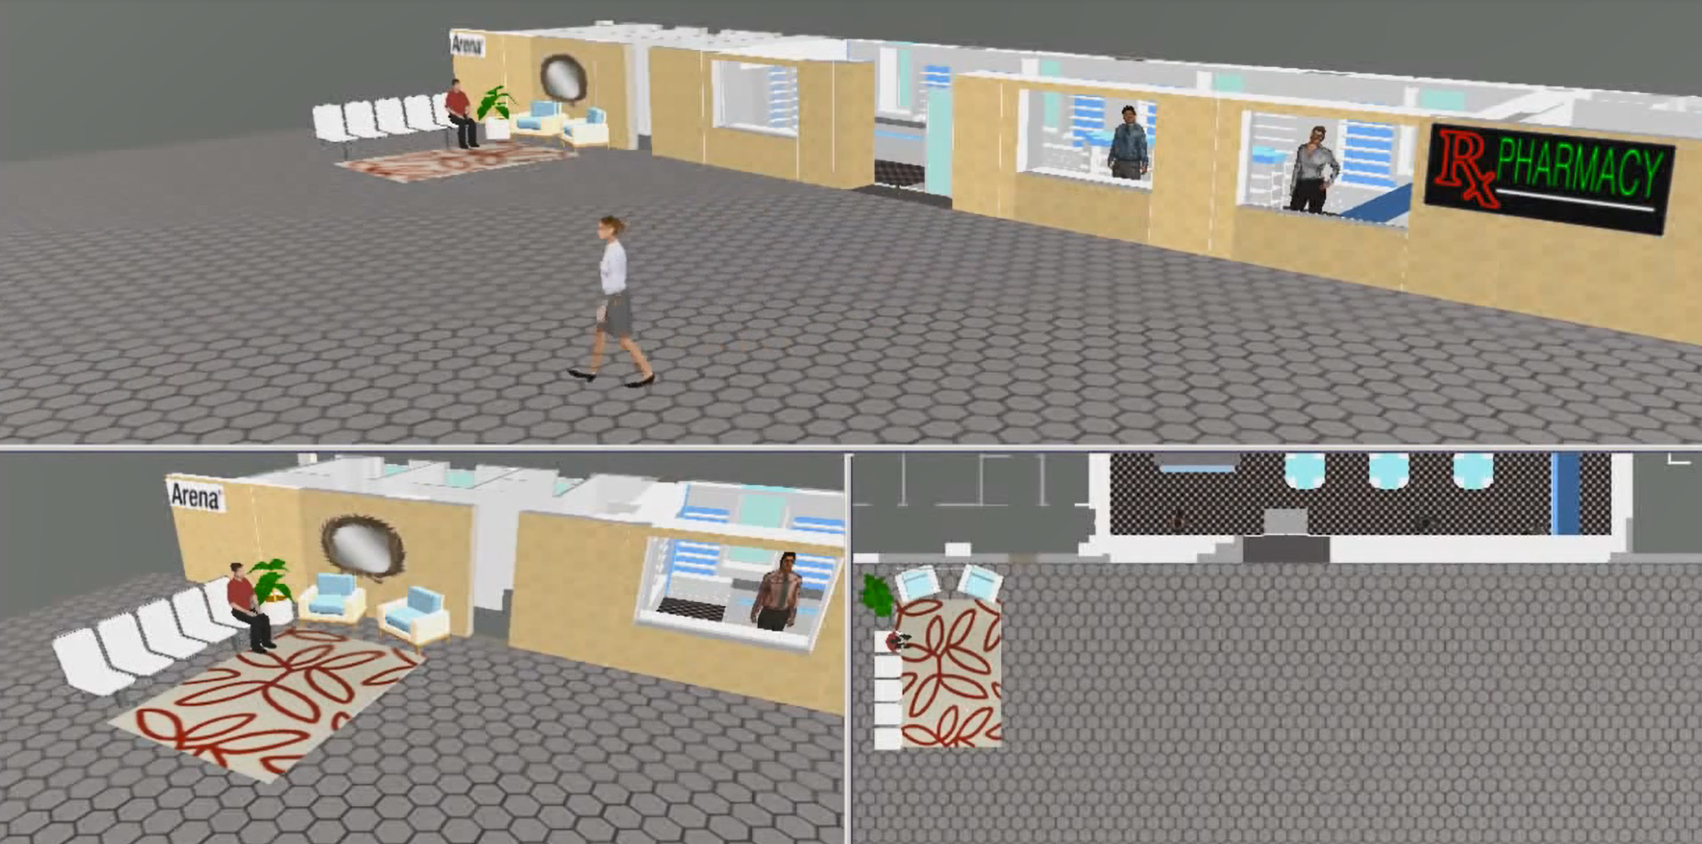 The simulated model of the post office through Arena Software (see